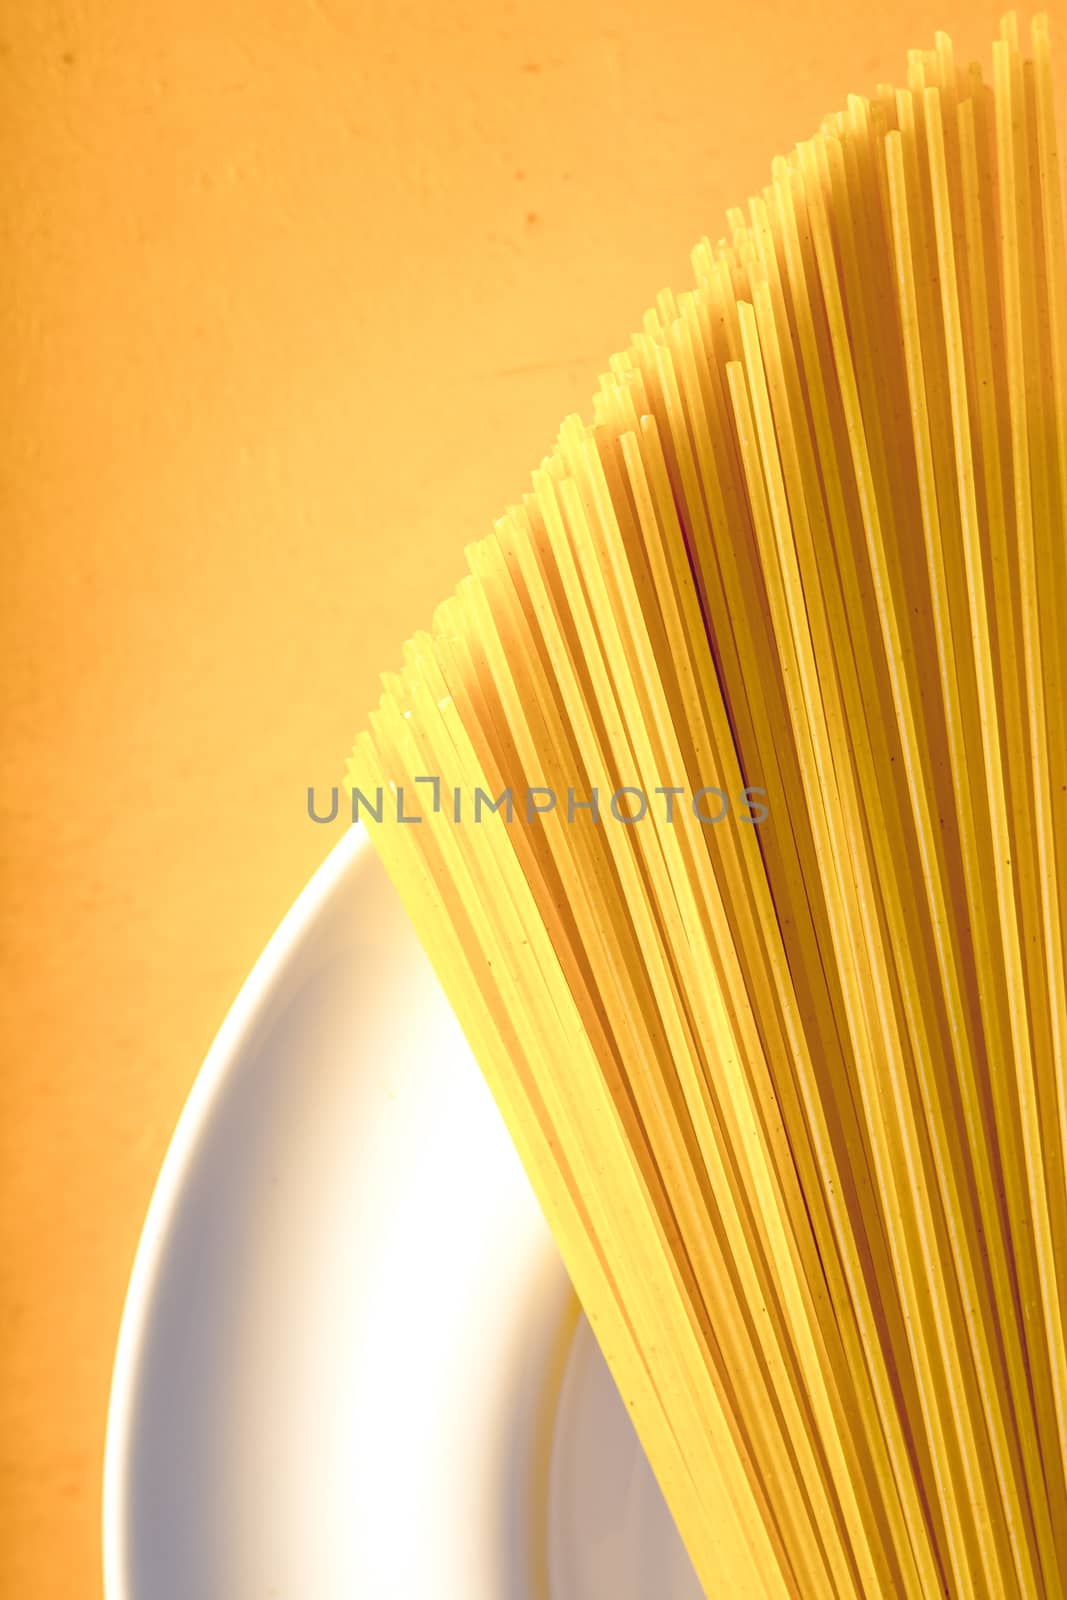 Raw spaghetti  on the white plate on the yellow background vertical by Deniskarpenkov